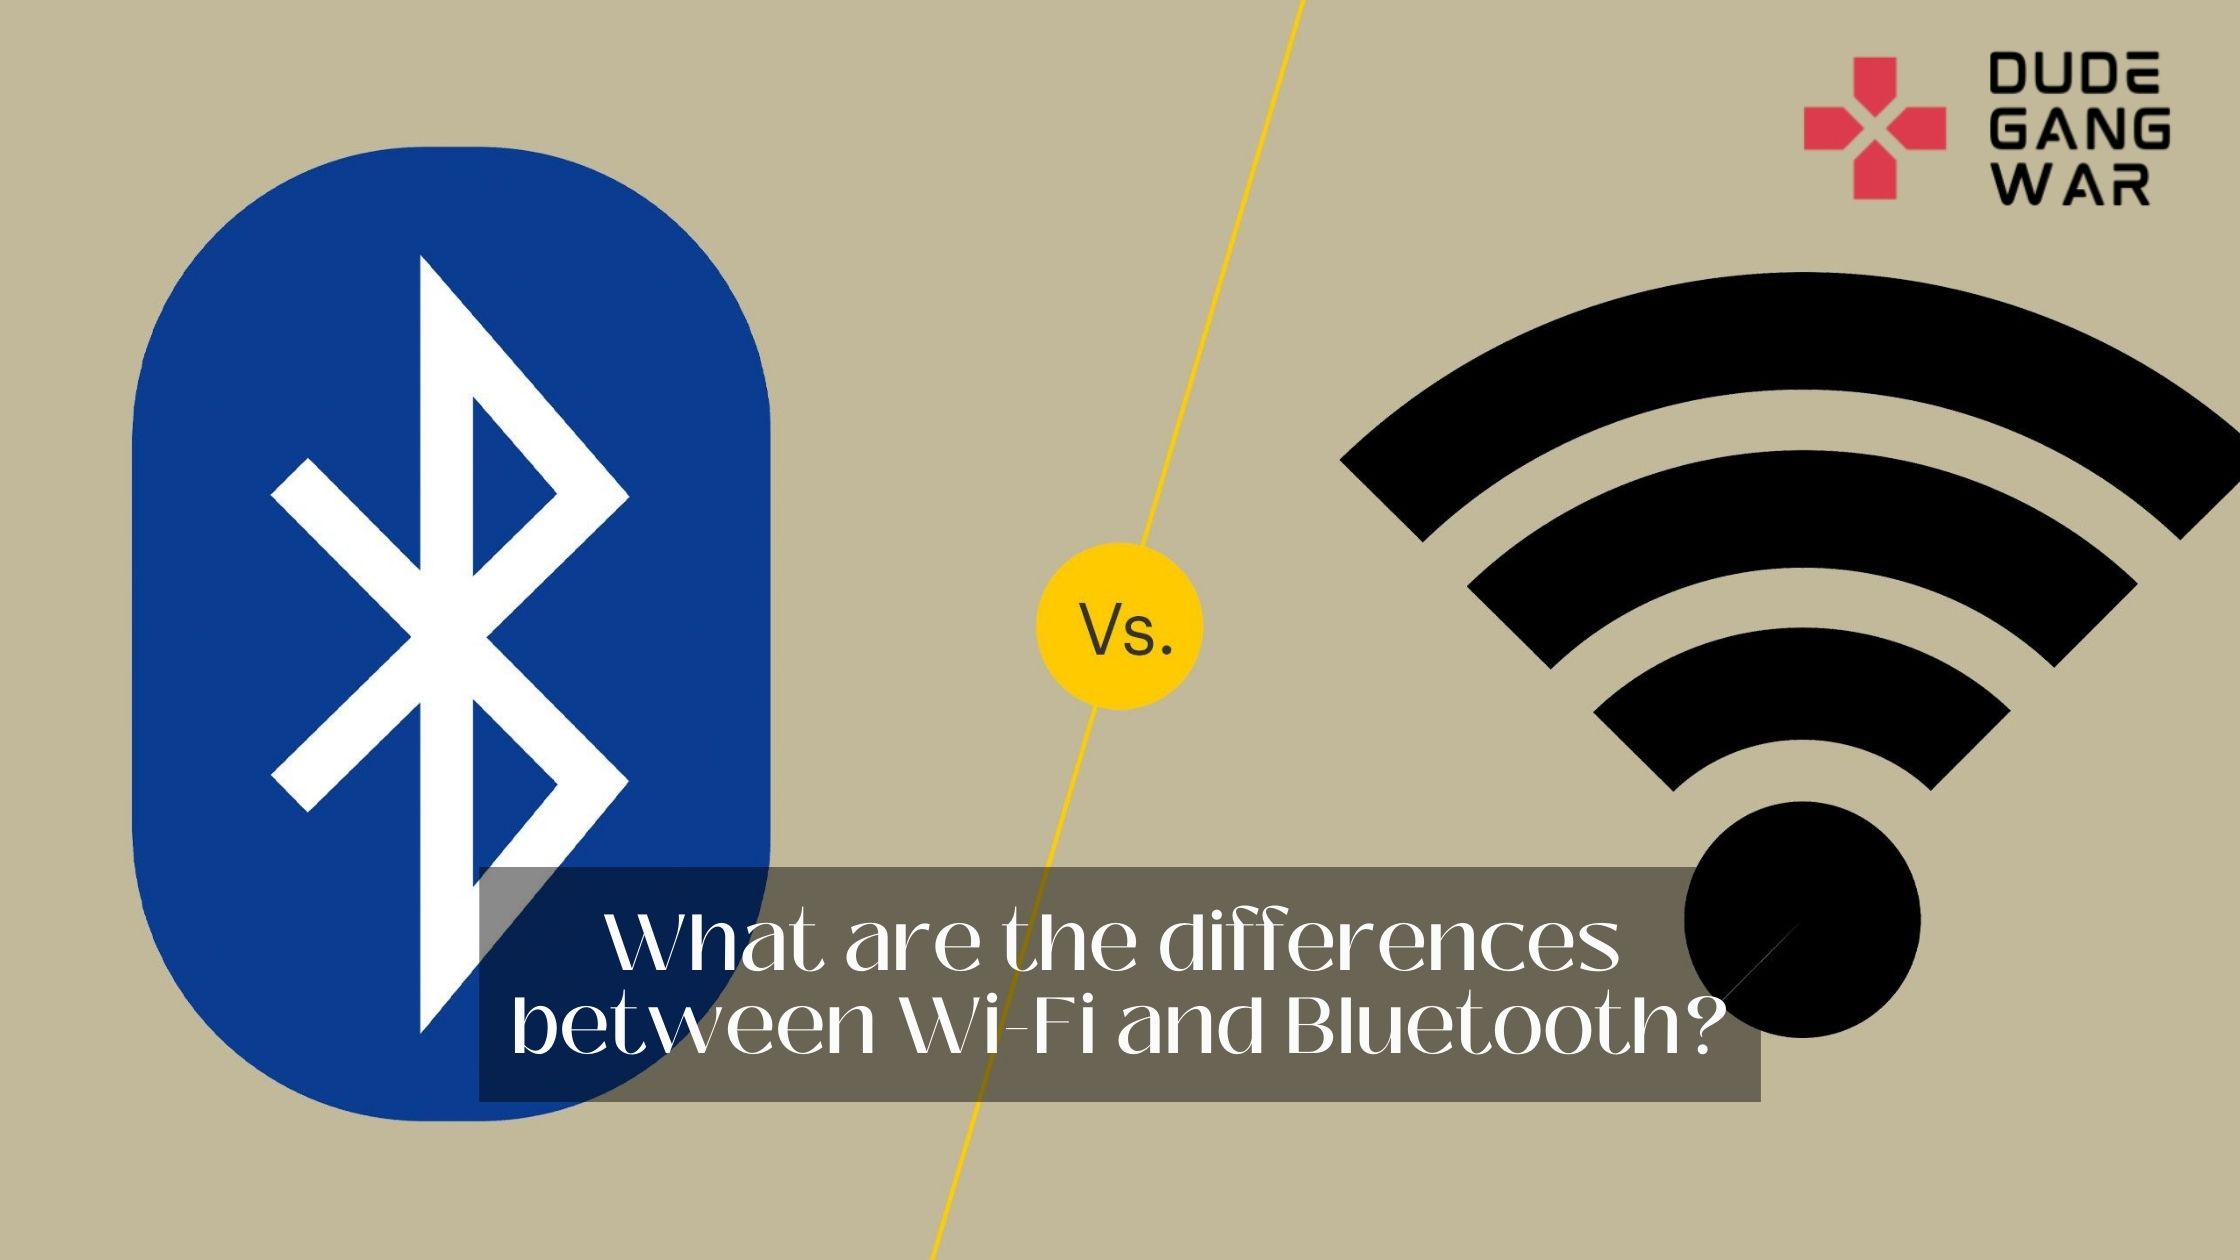 What are the differences between Wi-Fi and Bluetooth